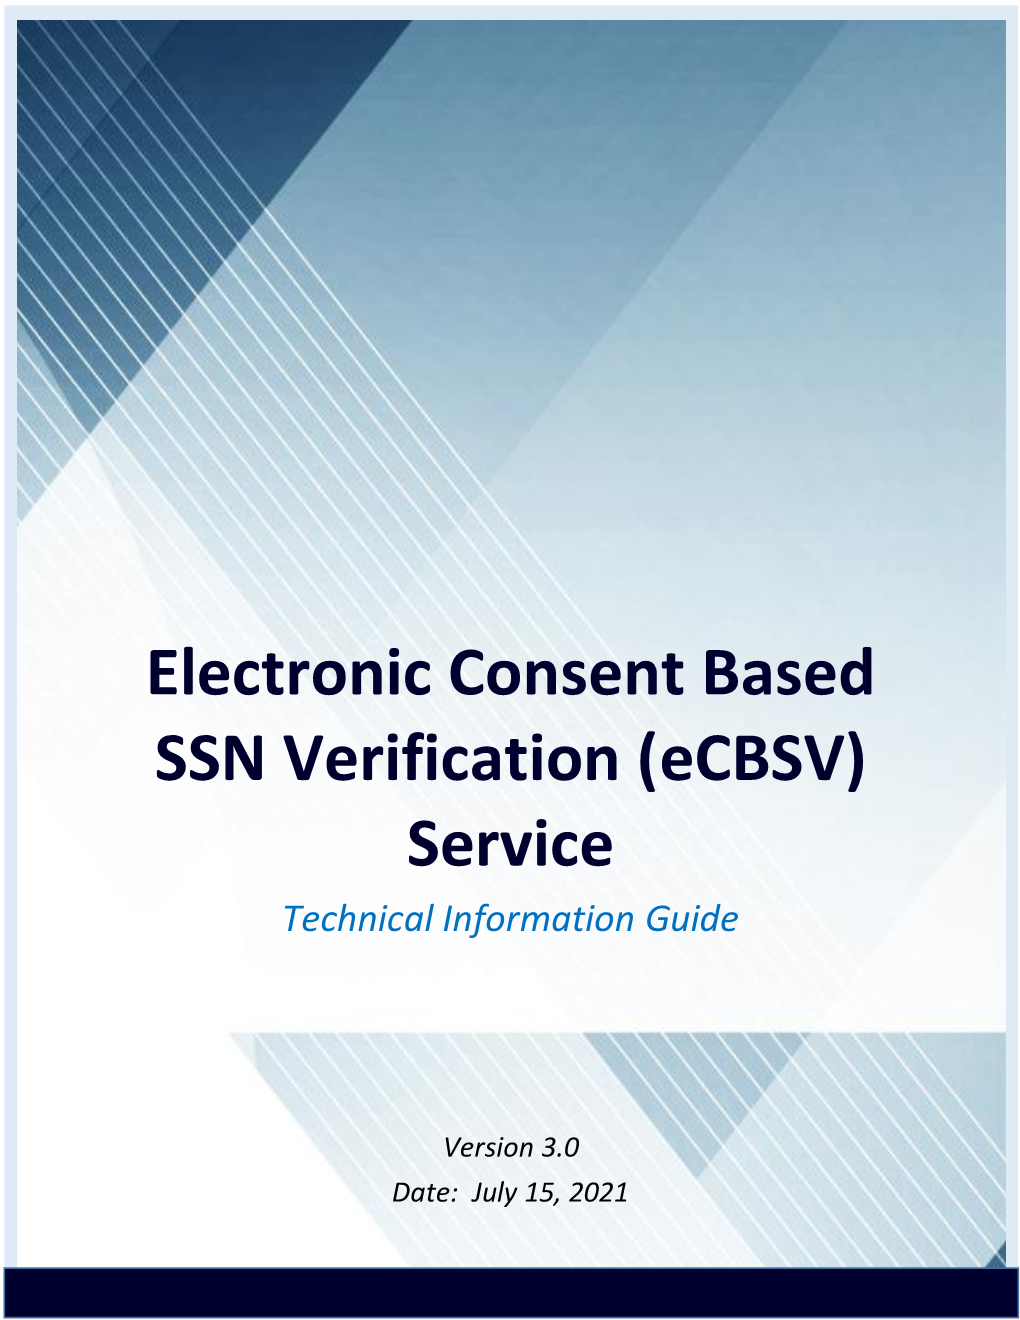 Electronic Consent Based SSN Verification (Ecbsv) Service Technical Information Guide